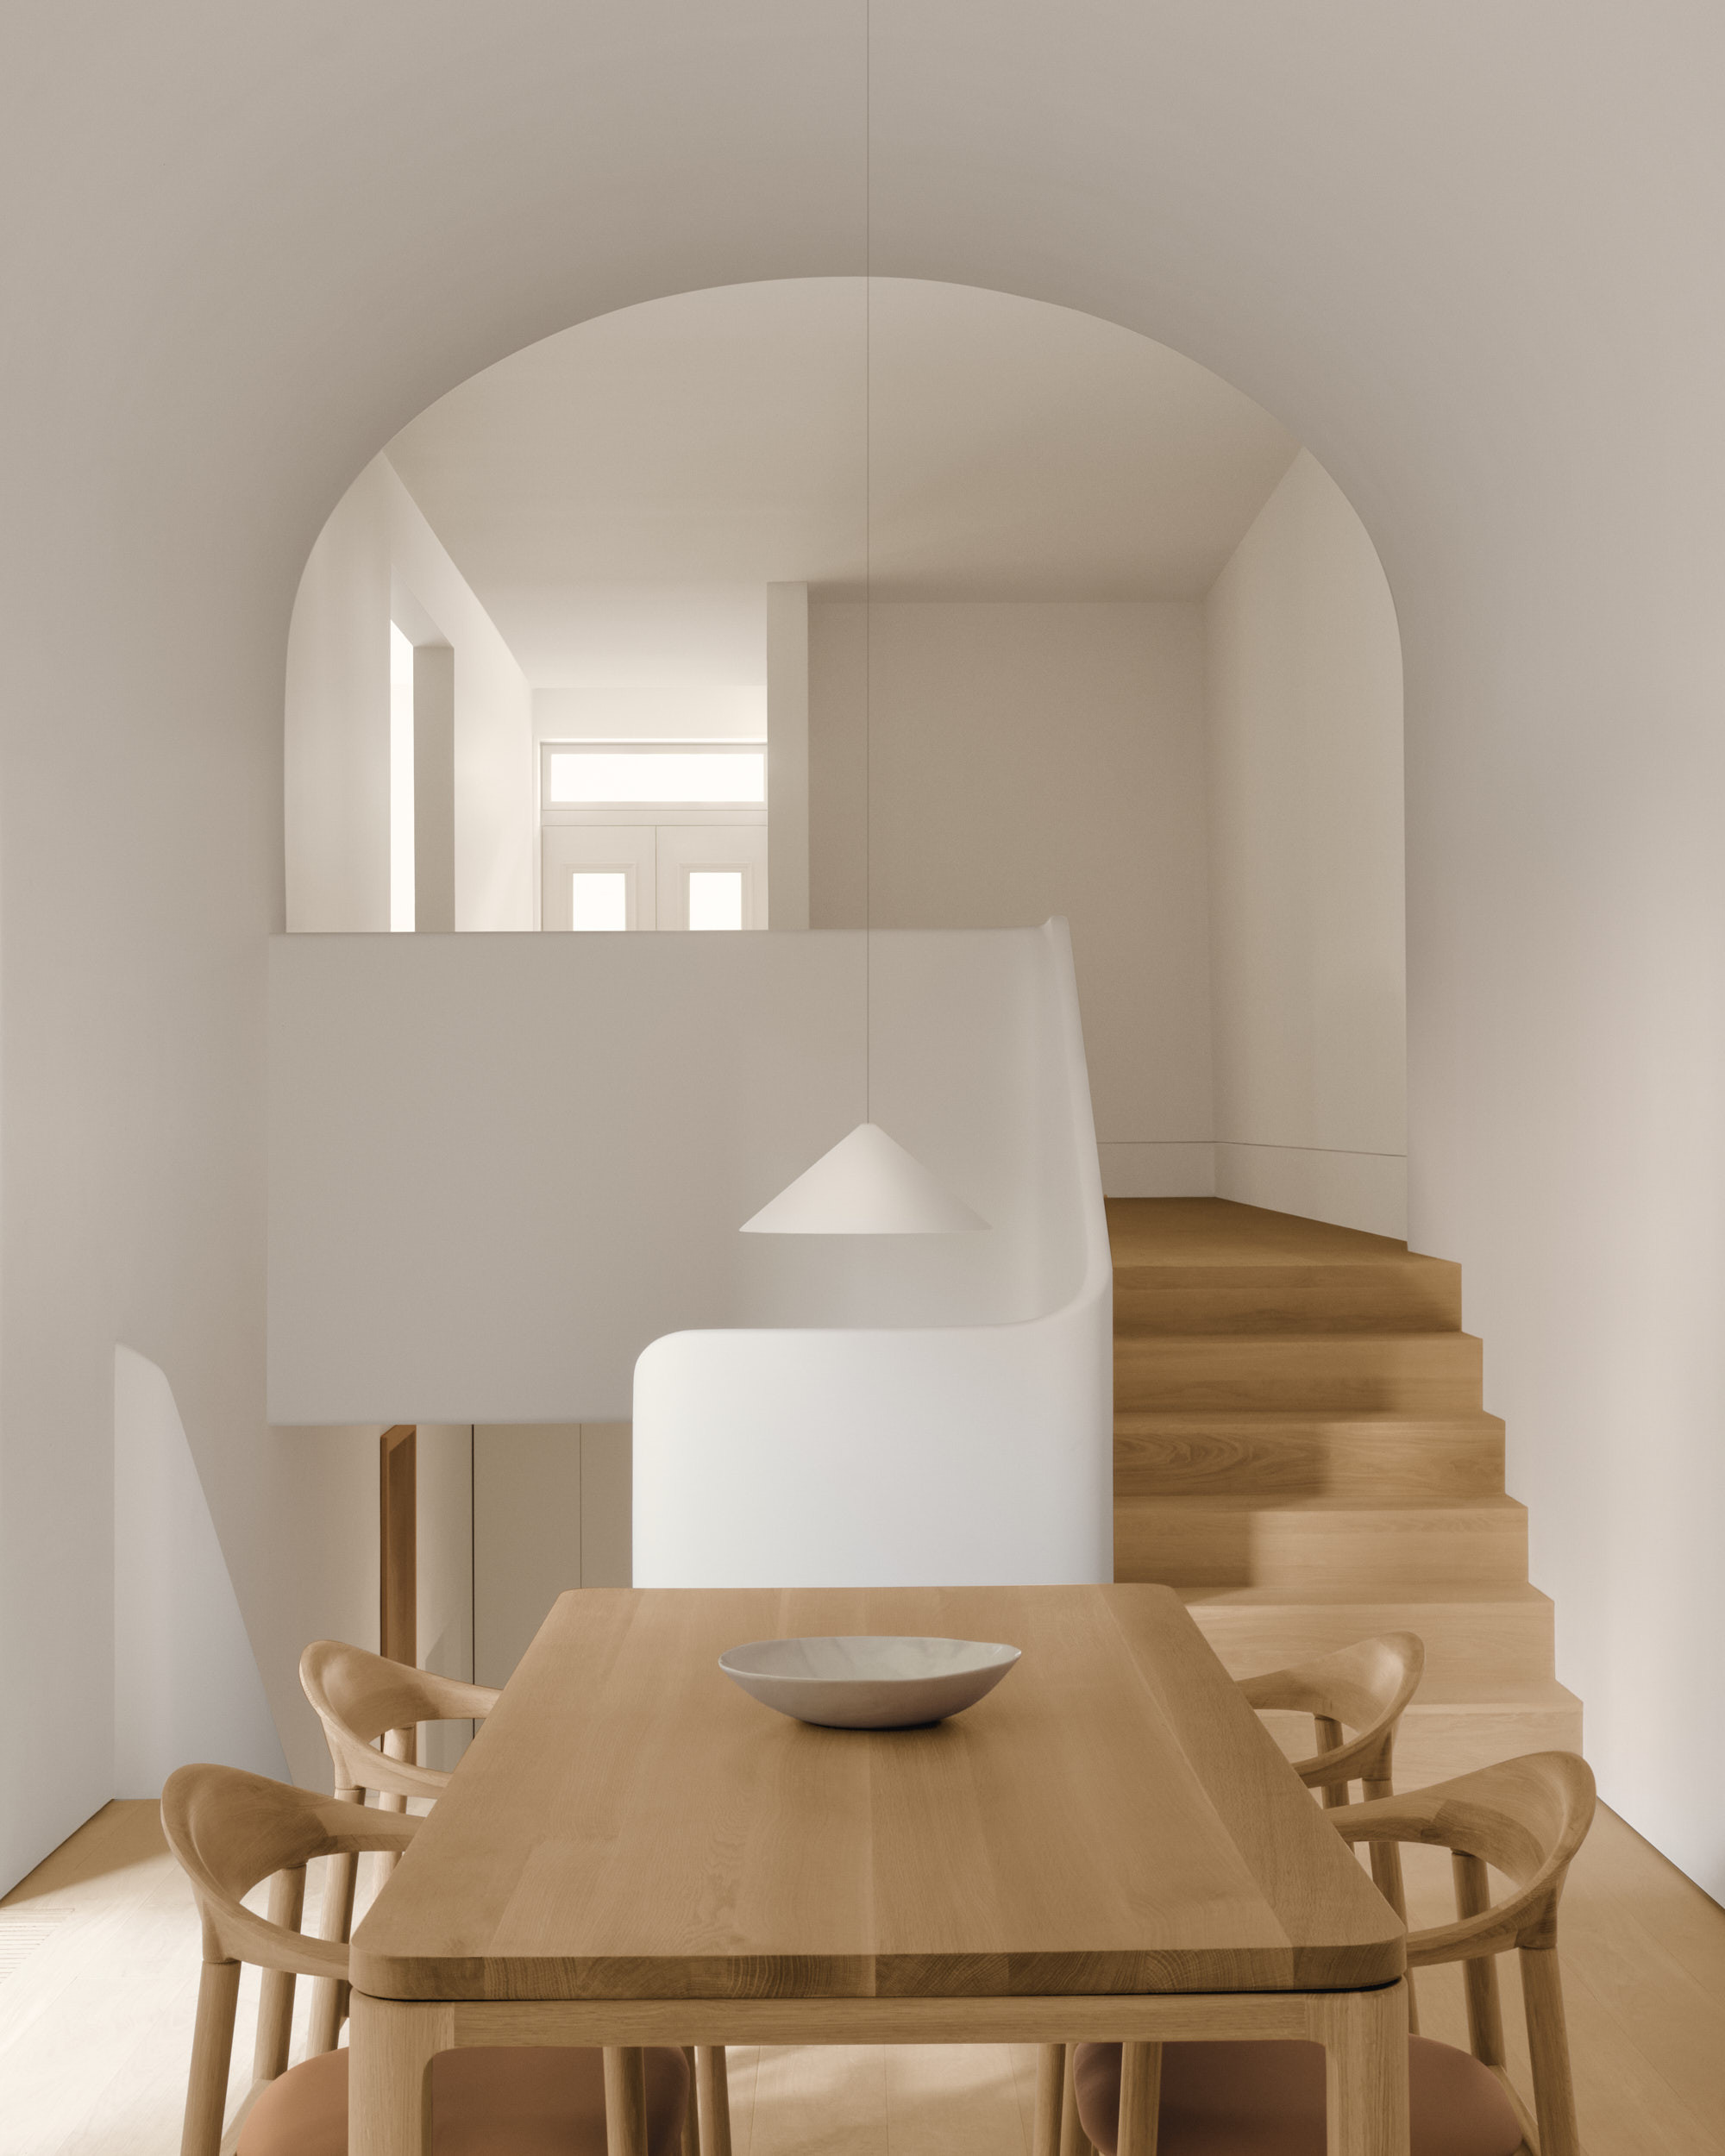 An arch ceiling over a split level area where a Nord table and Dune chair set is placed in the lower section